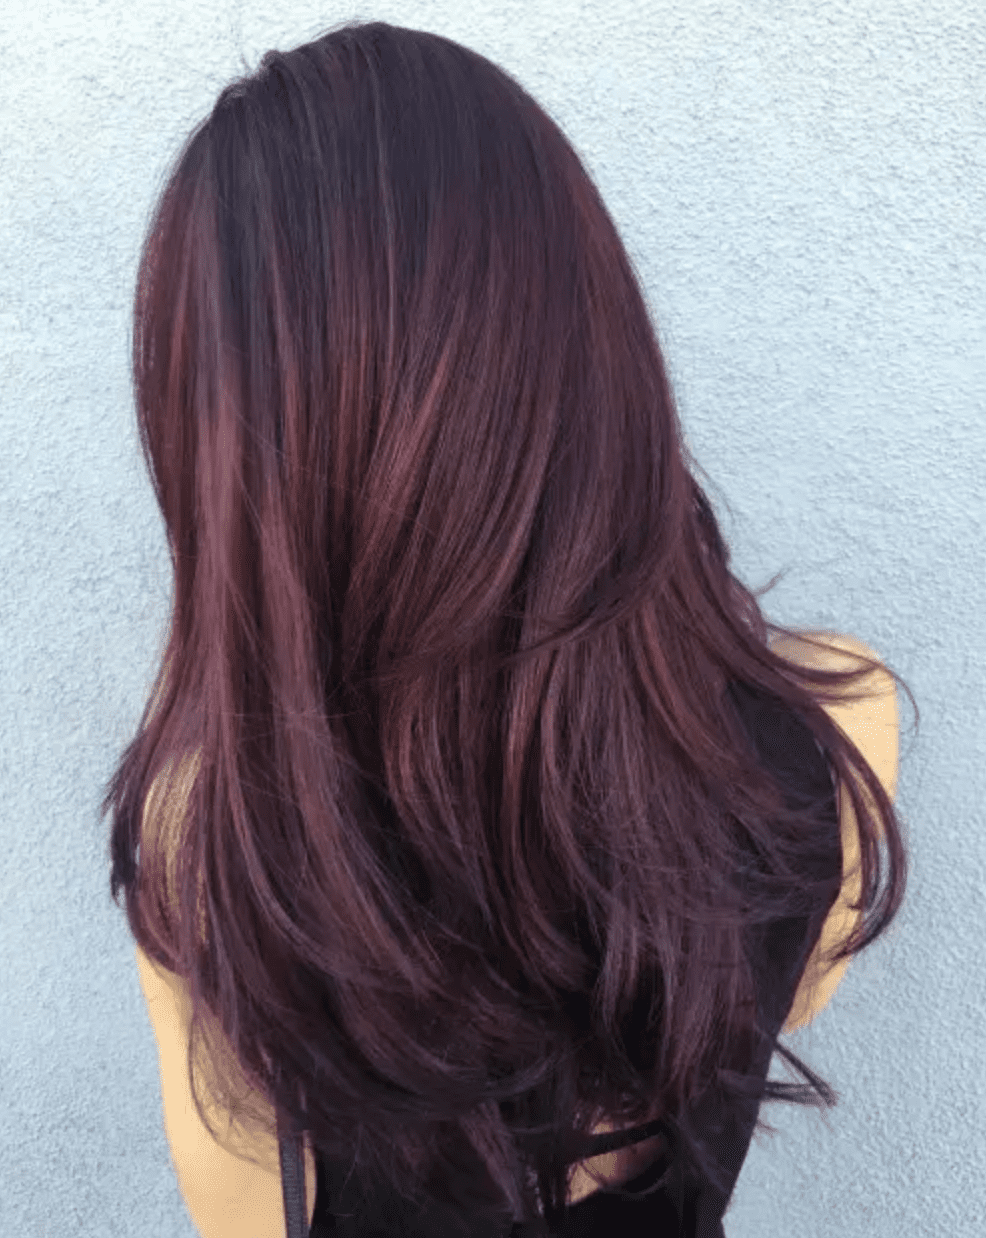 Highlights without bleach